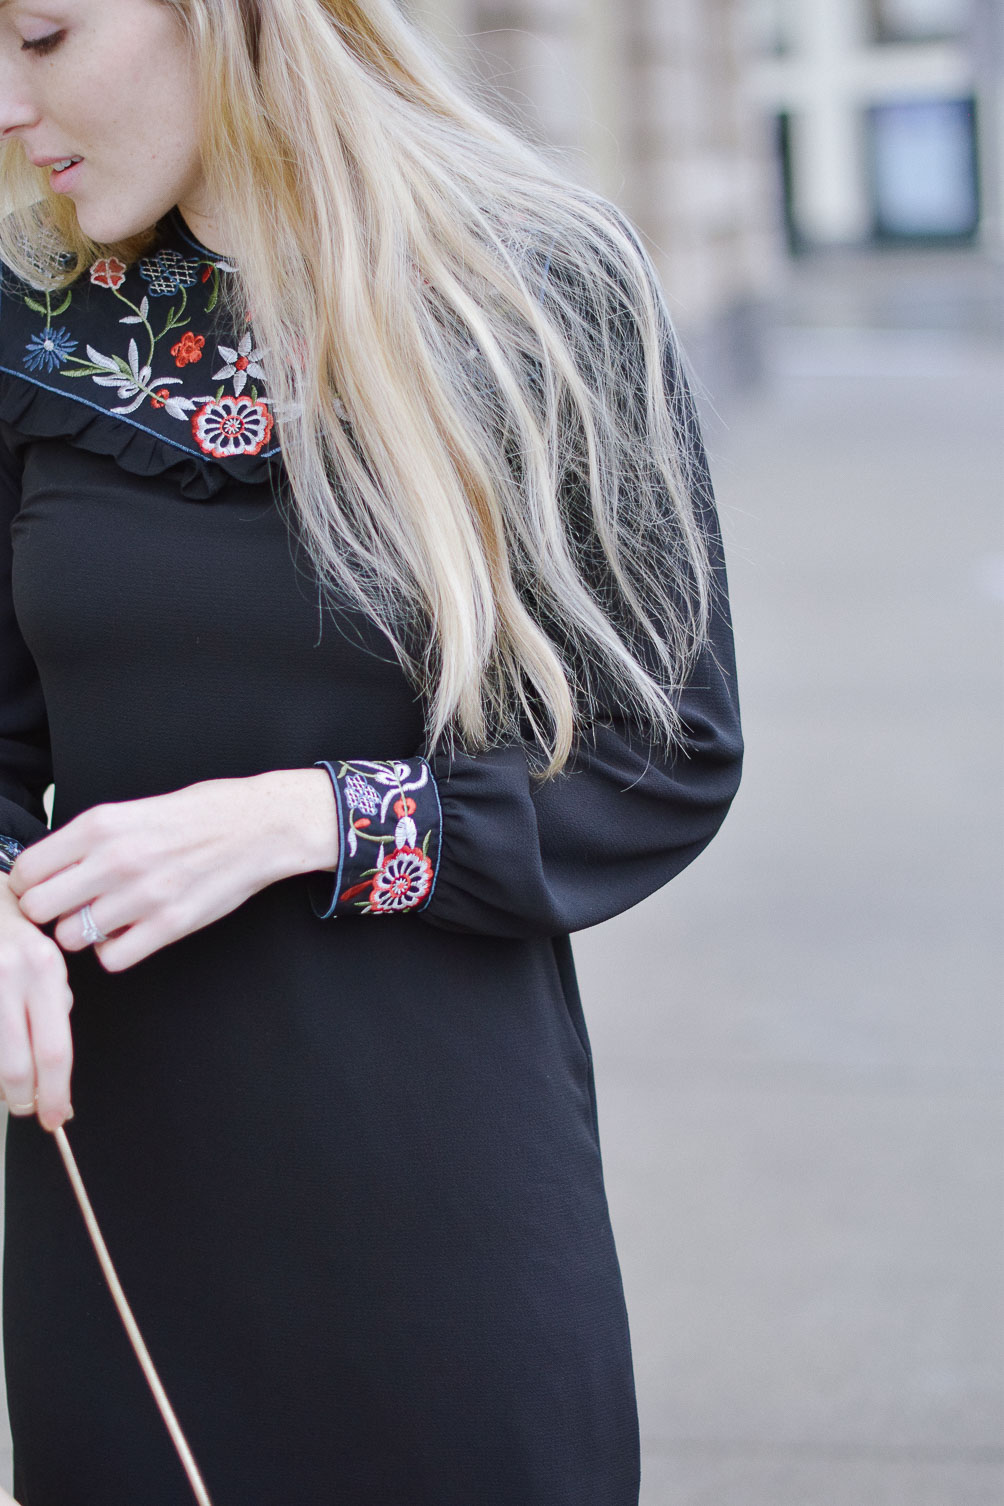 styling this New Year's Even outfit inspiration with embroidered shift dress